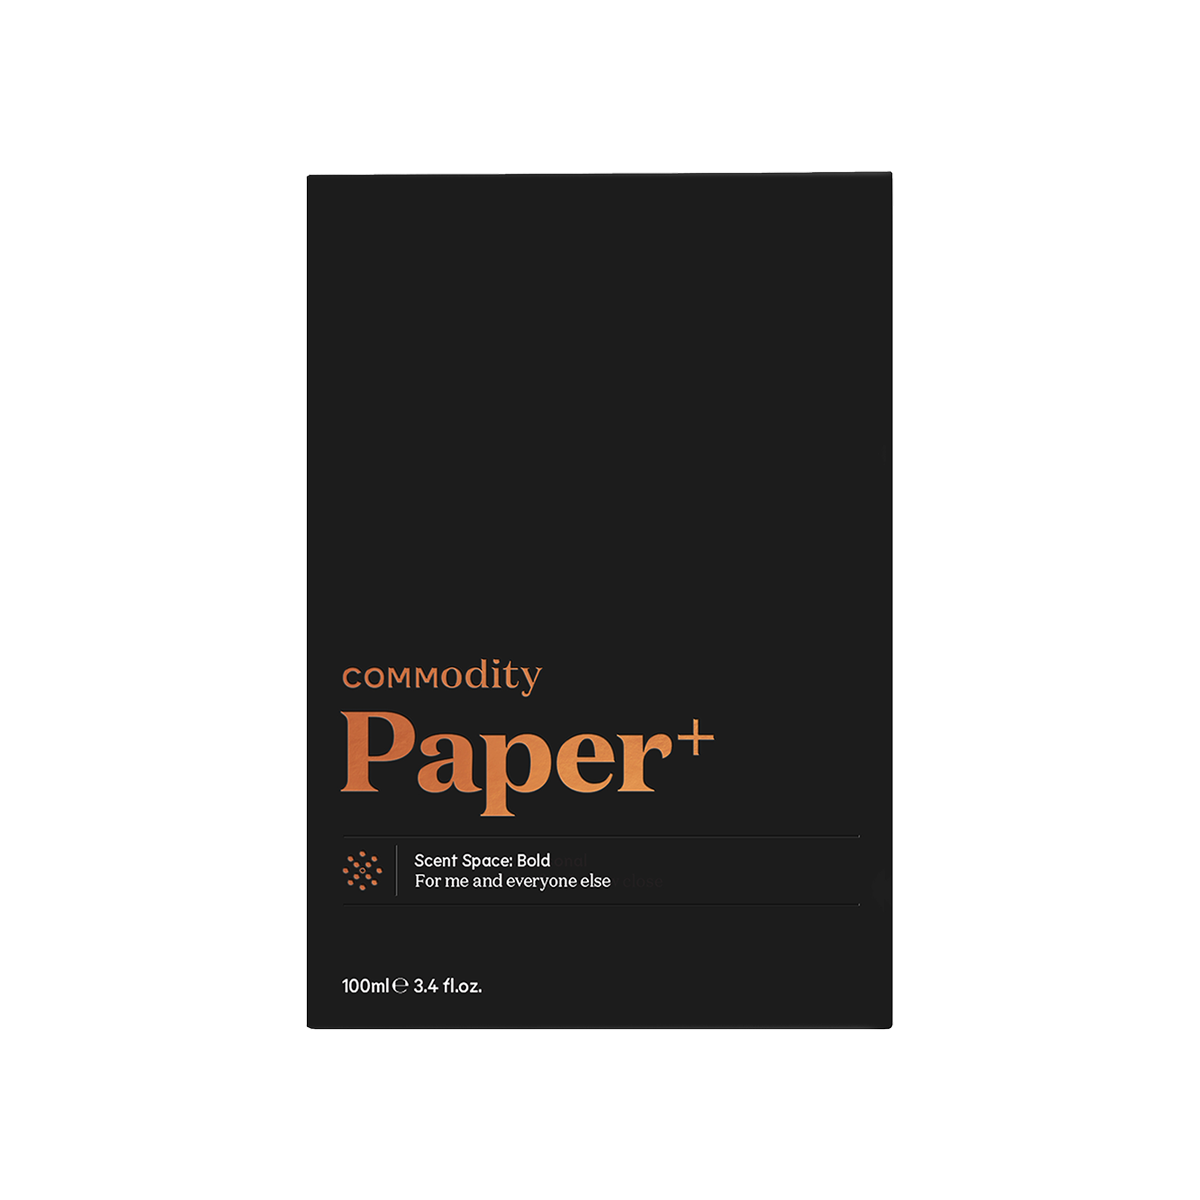 Commodity - Paper+ Bold